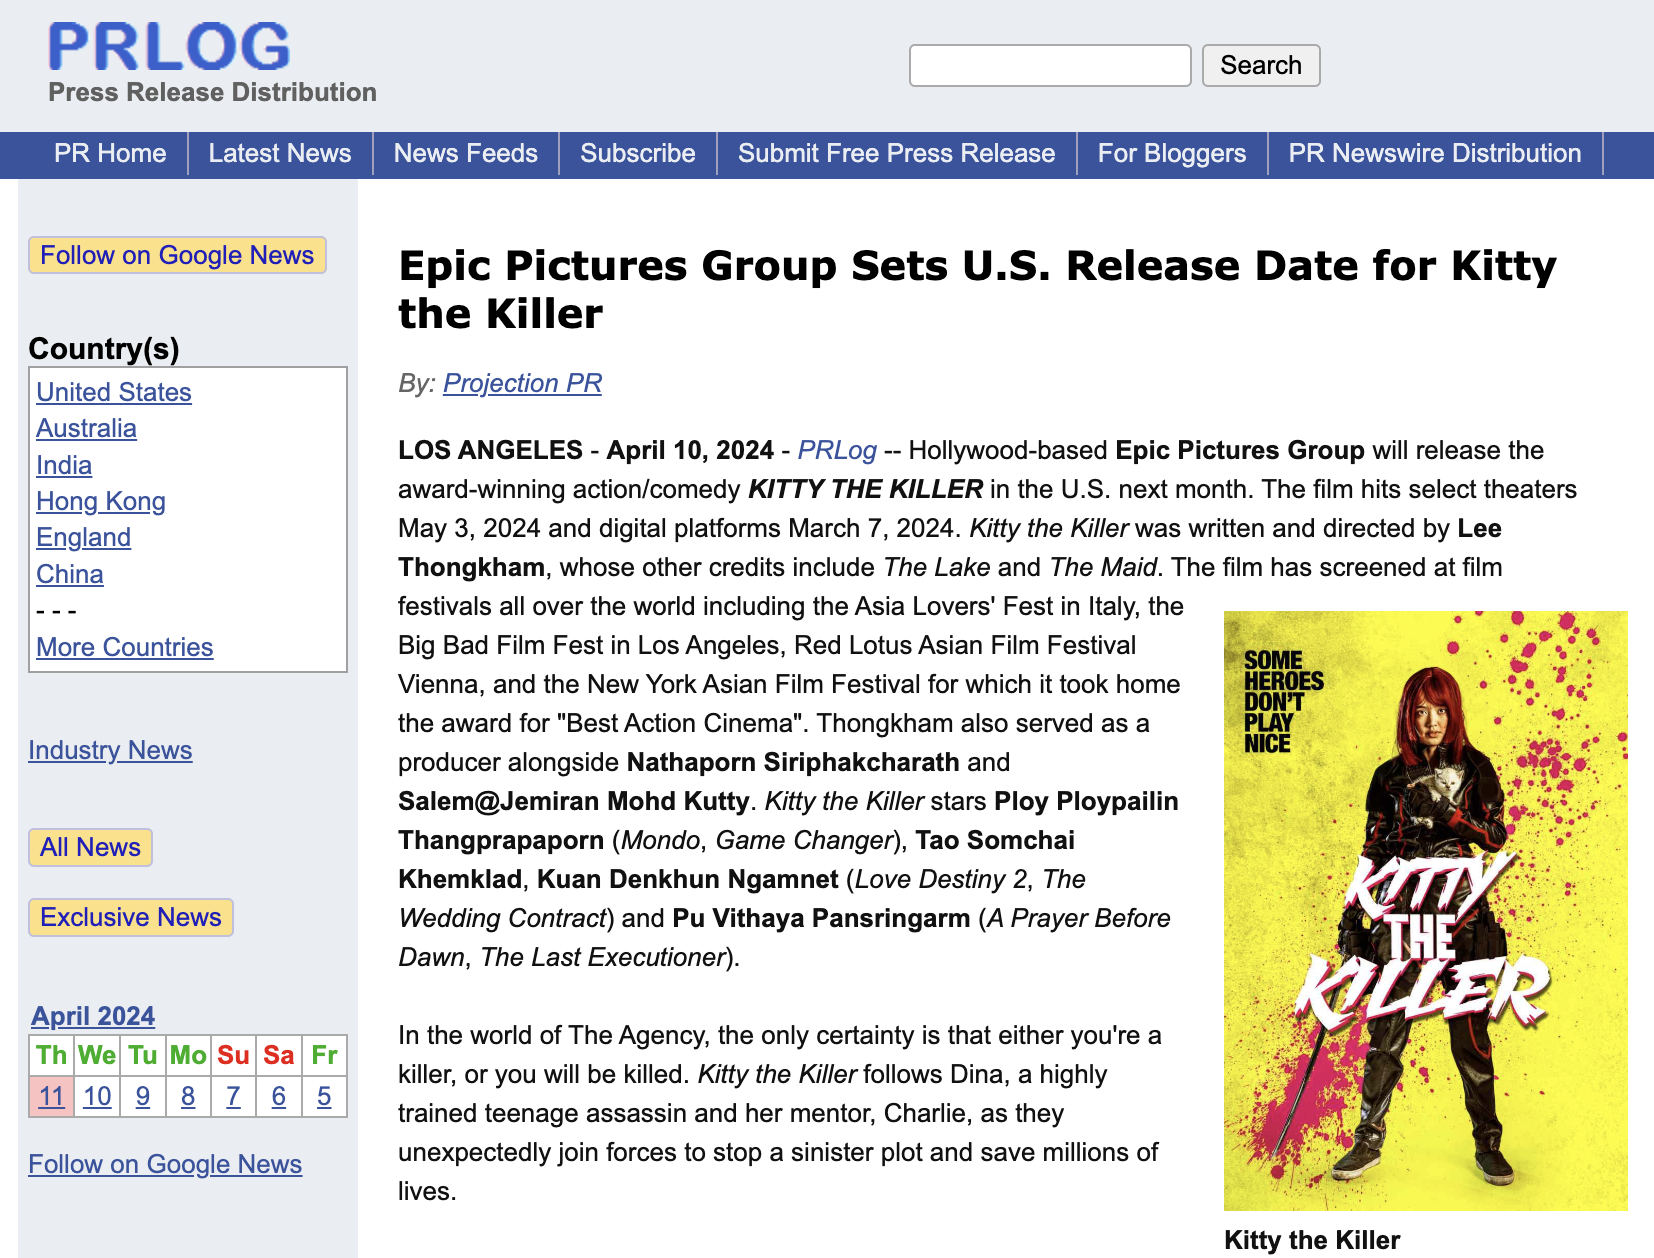 Epic Pictures Group Sets U.S. Release Date for Kitty the Killer